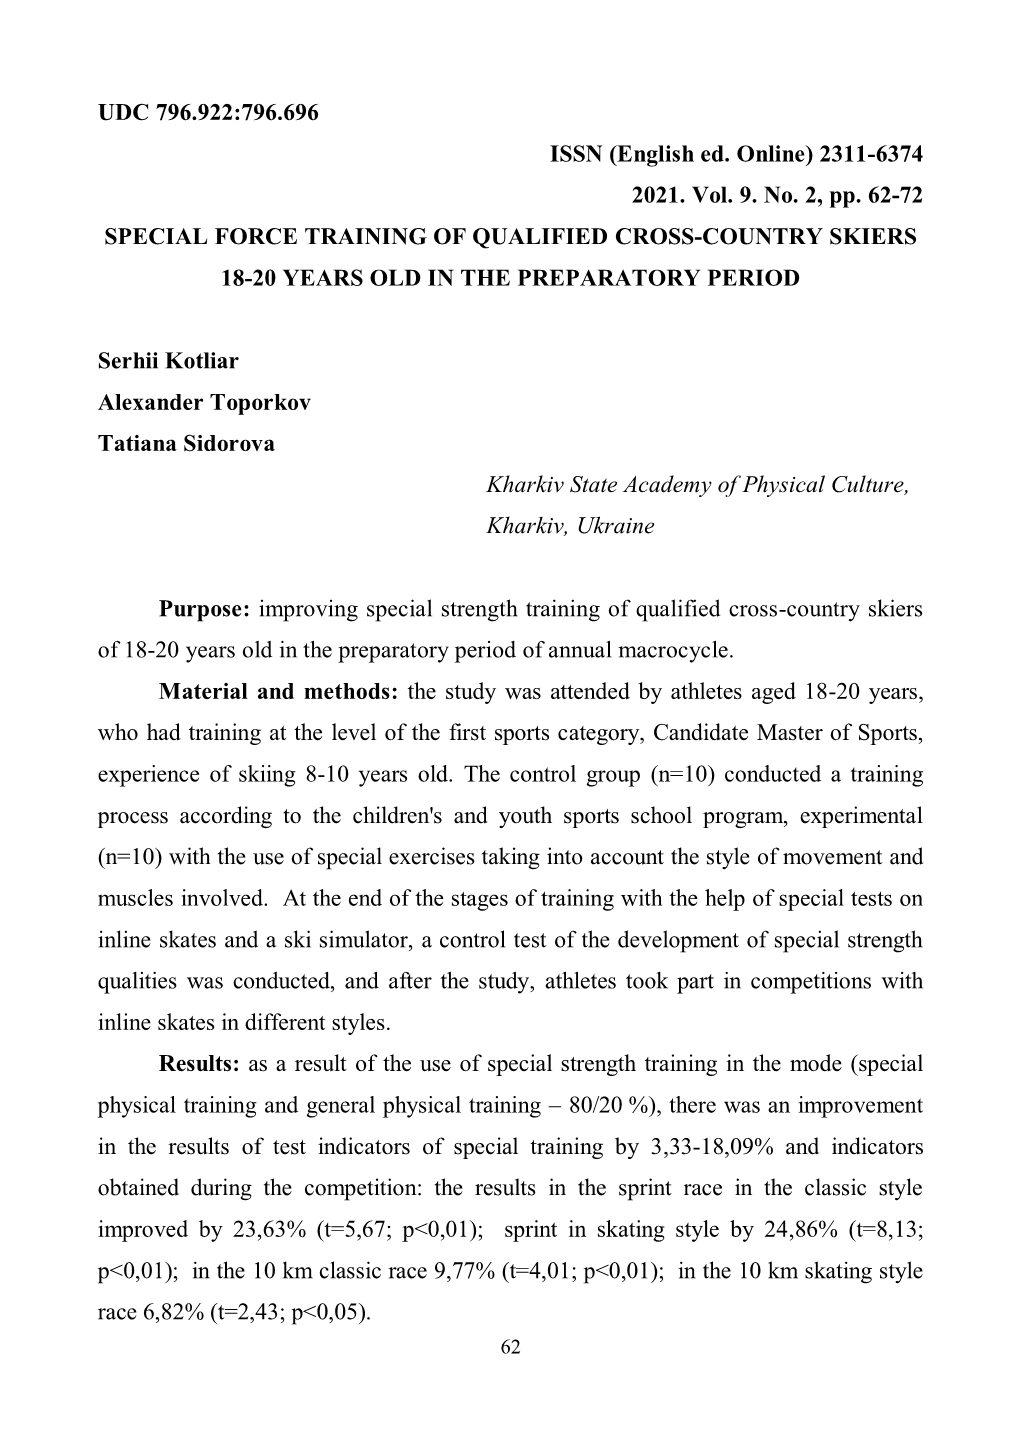 2311-6374 2021. Vol. 9. No. 2, Pp. 62-72 SPECIAL FORCE TRAINING of QUALIFIED CROSS-COUNTRY SKIERS 18-20 YEARS OLD in the PREPARATORY PERIOD